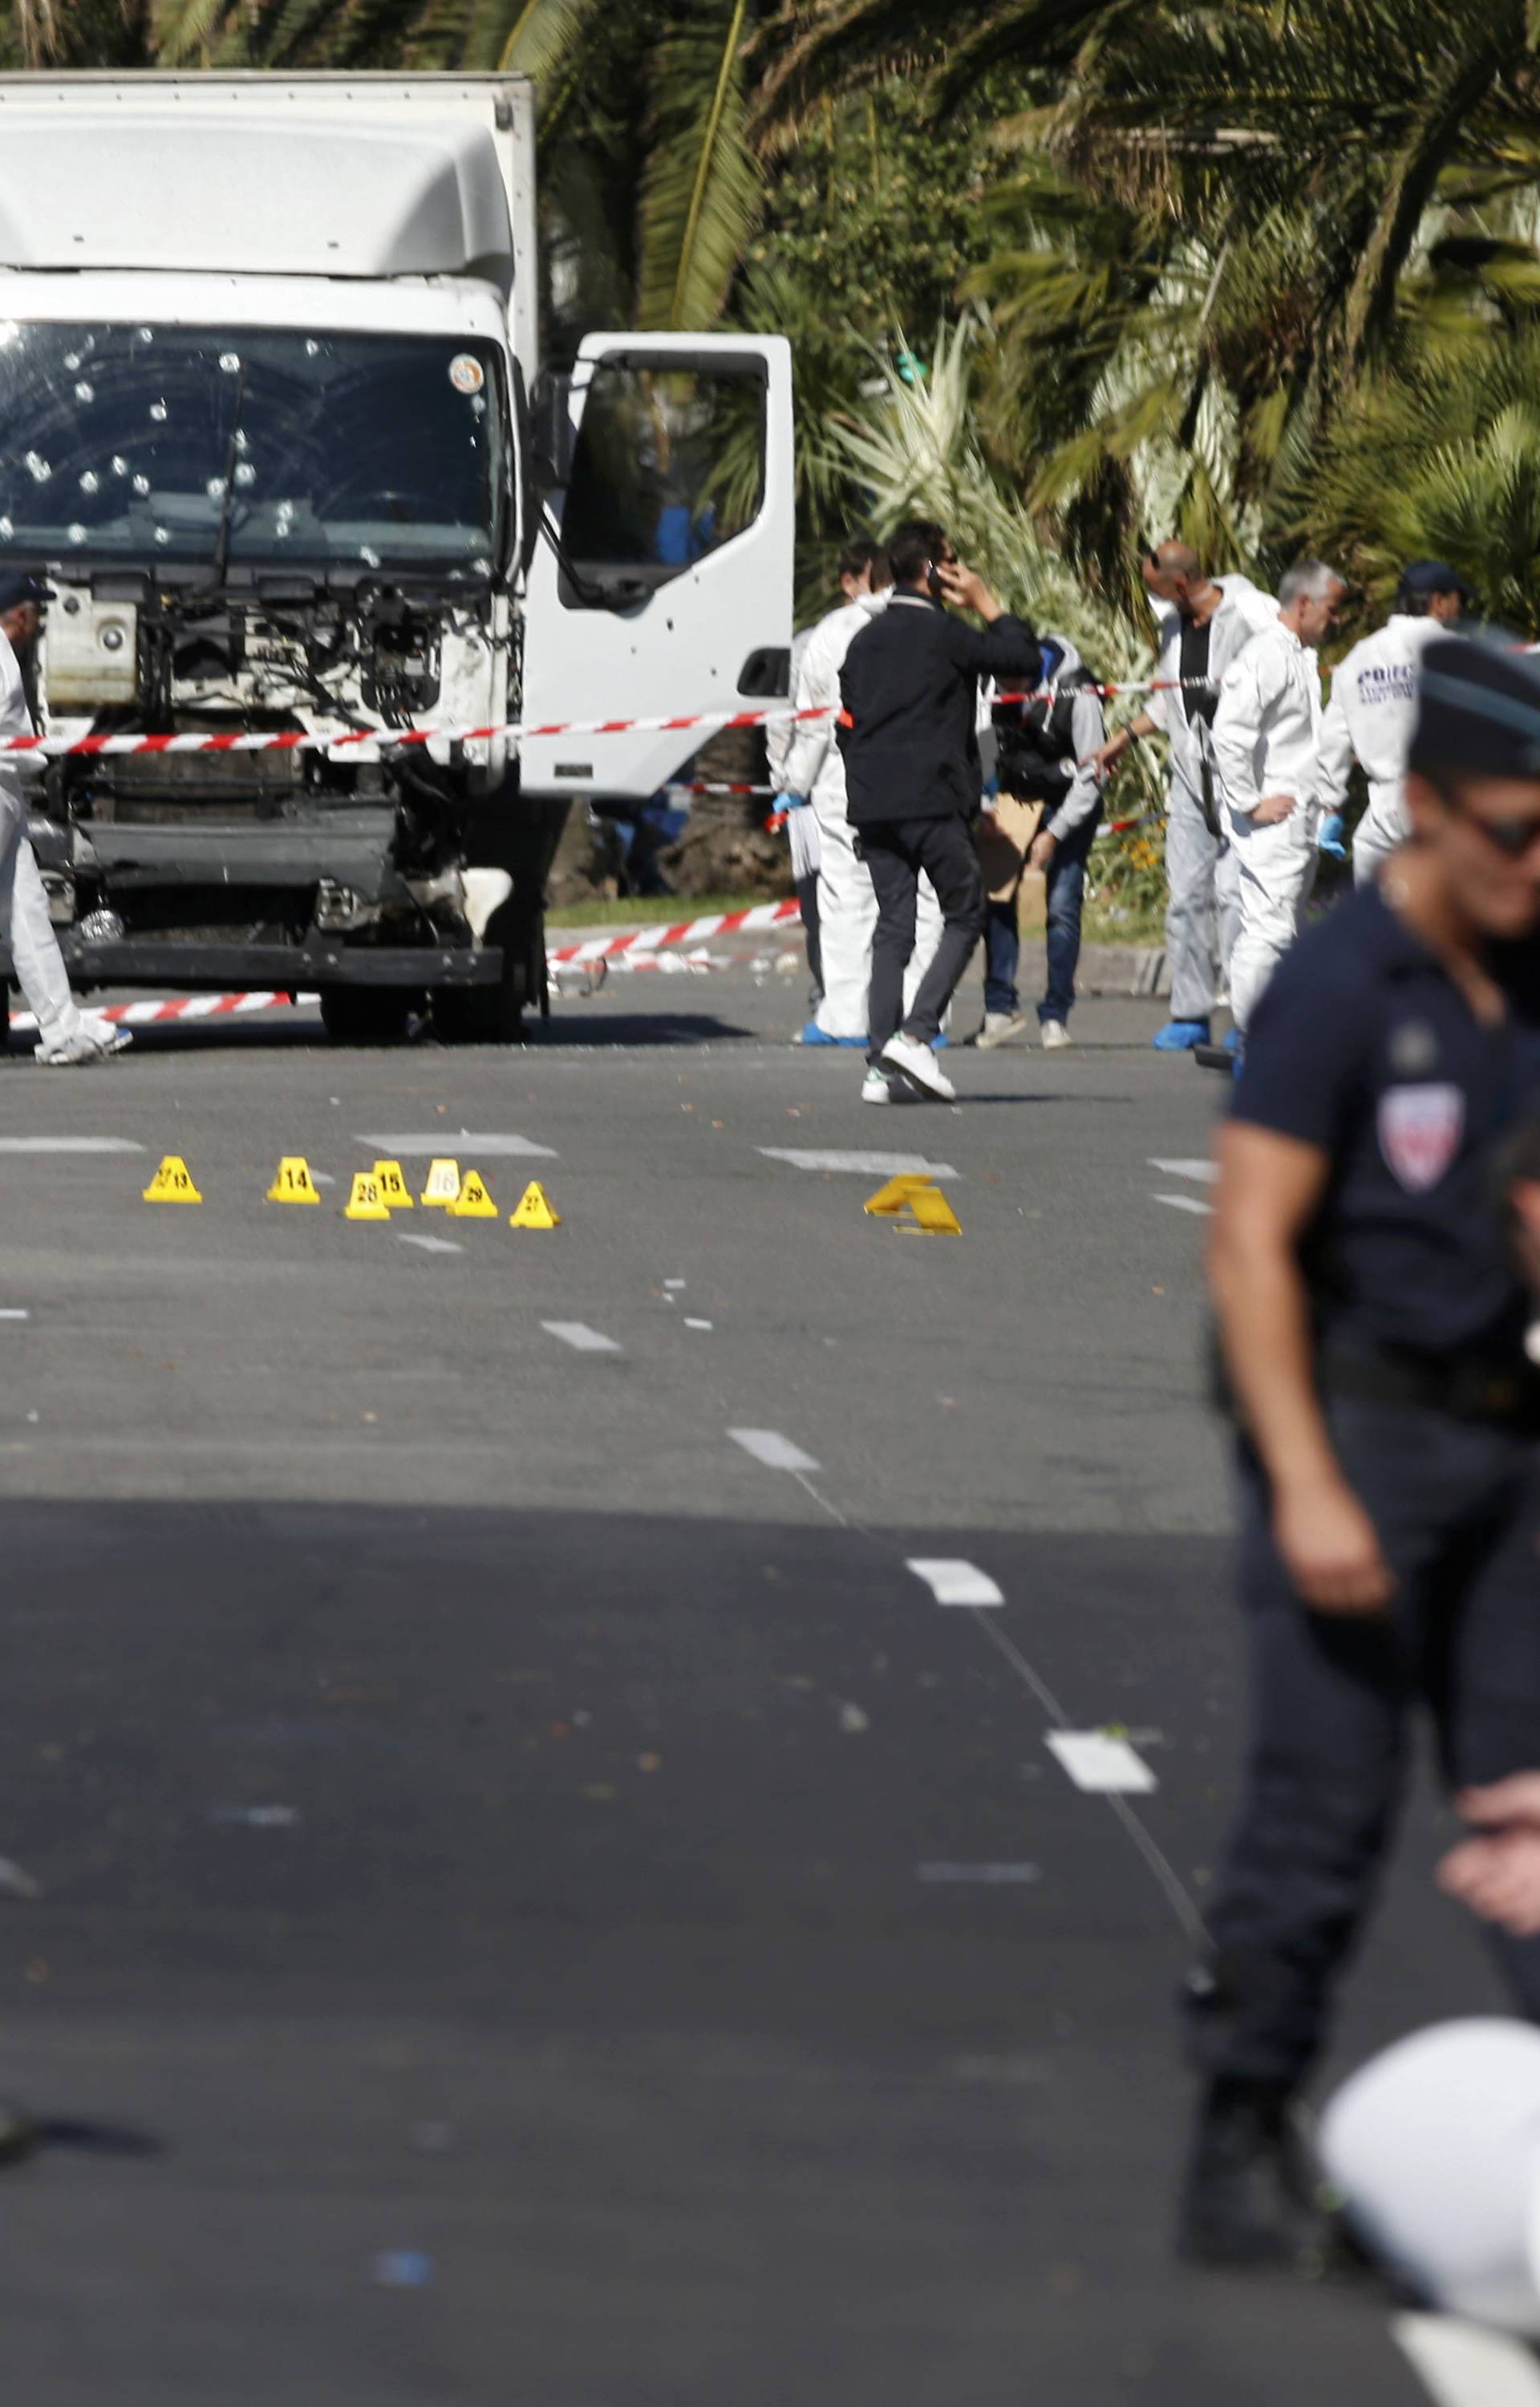 French police secure the area as the investigation continues at the scene near the heavy truck that ran into a crowd at high speed killing scores who were celebrating the Bastille Day July 14 national holiday on the Promenade des Anglais in Nice